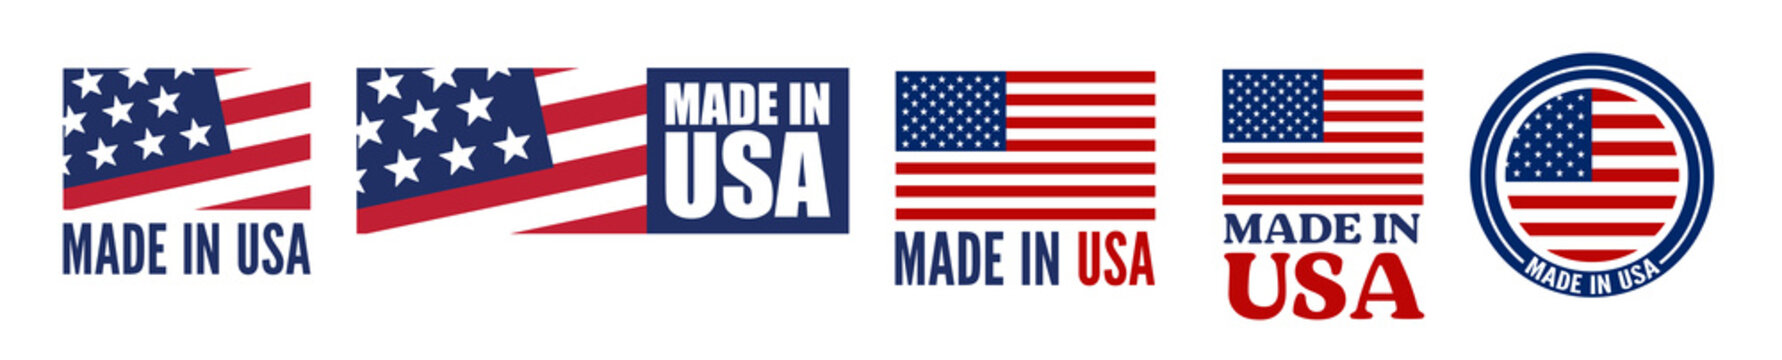 Made in the USA logo or label. Vector illustration